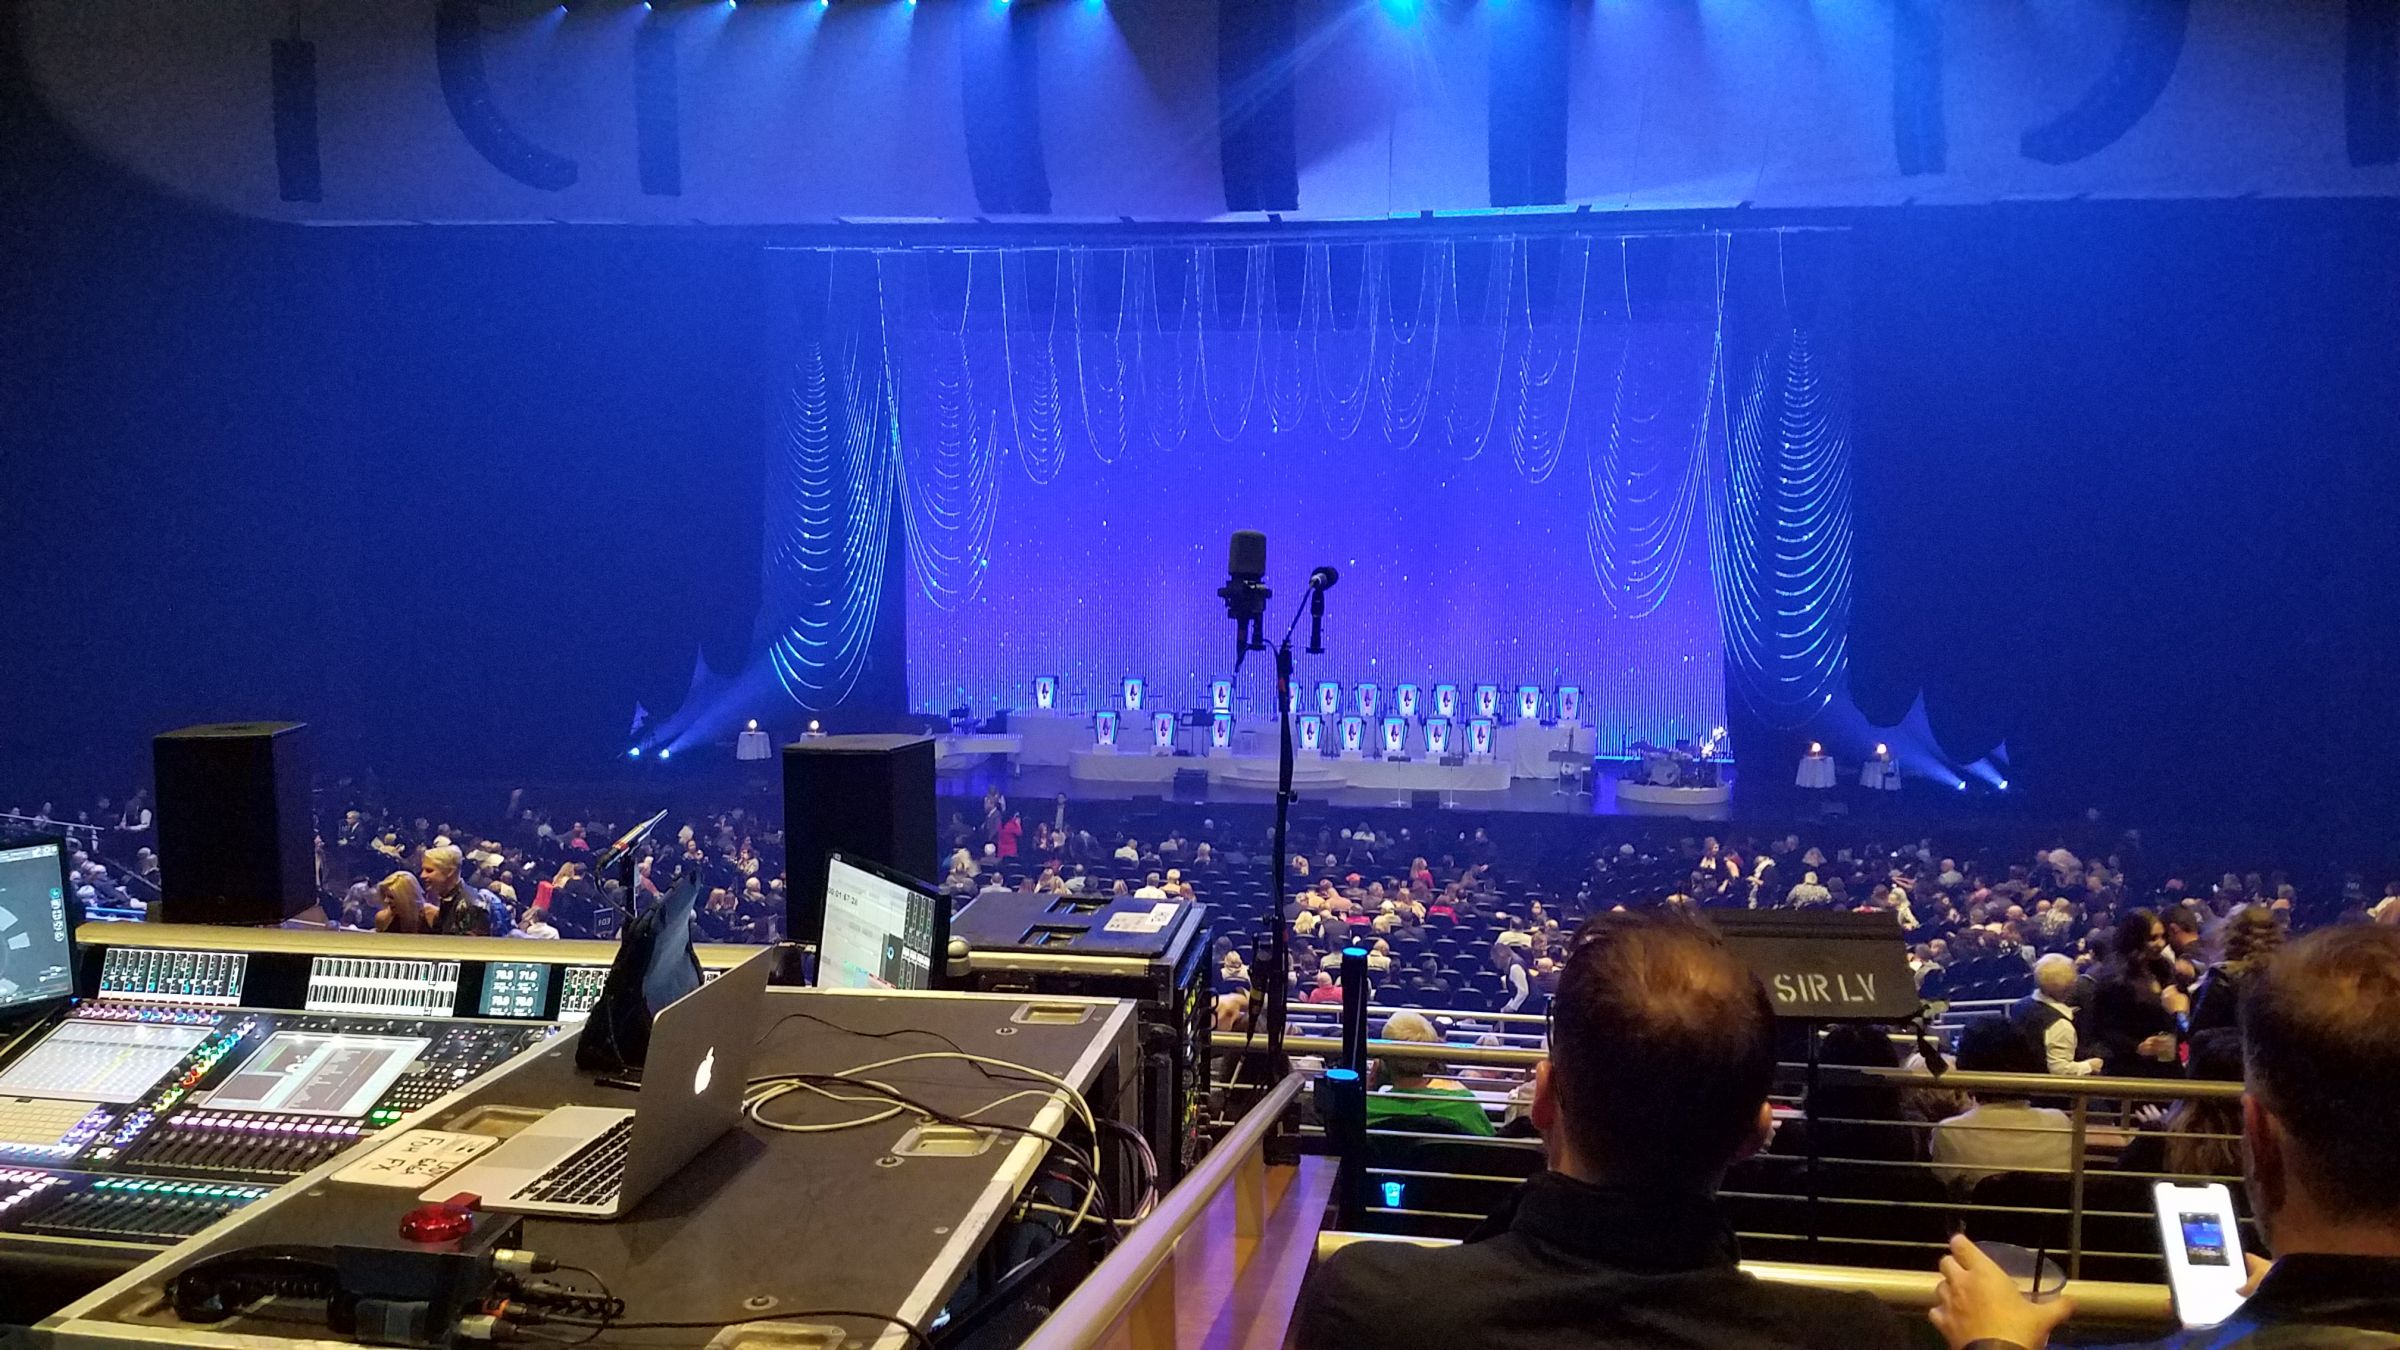 Paid 300 per seat, obstructed view Park Theater at Park MGM Section